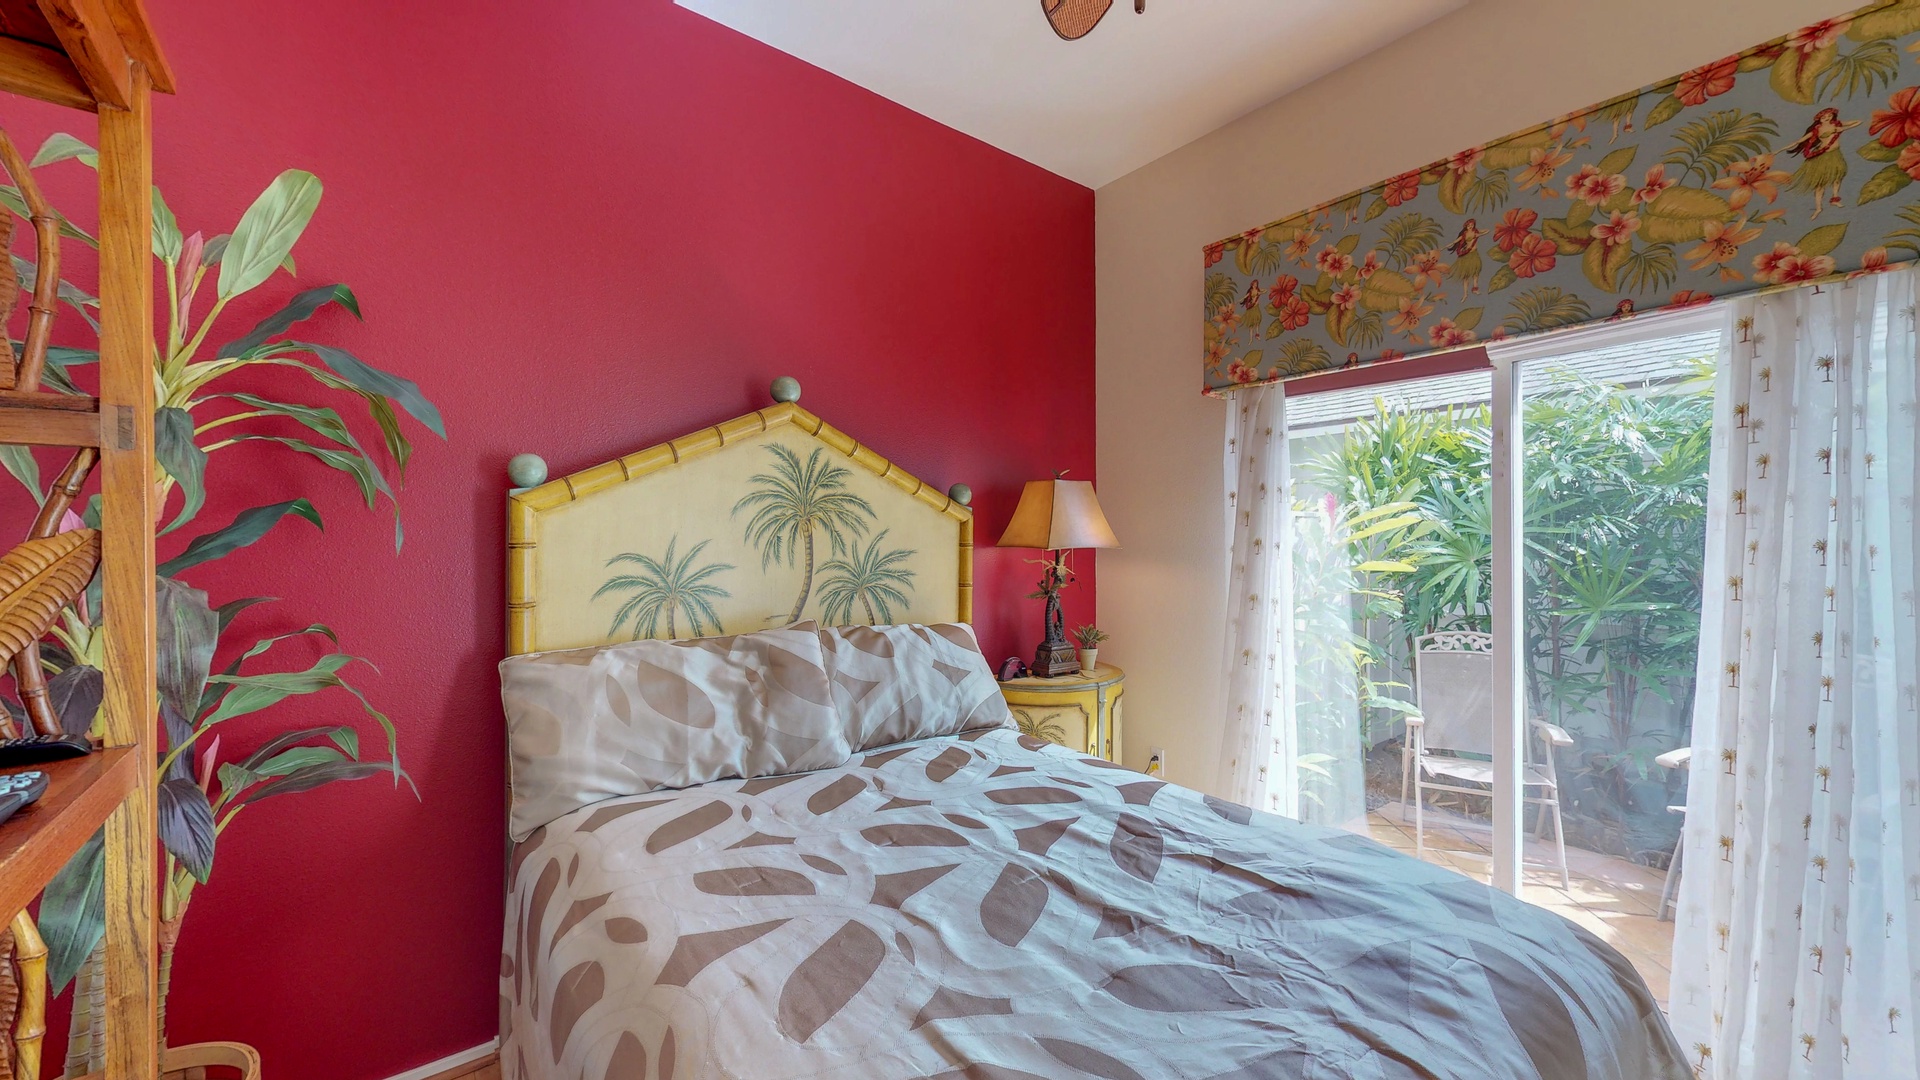 Kapolei Vacation Rentals, Coconut Plantation 1080-1 - The downstairs bedroom has access to the private lanai.